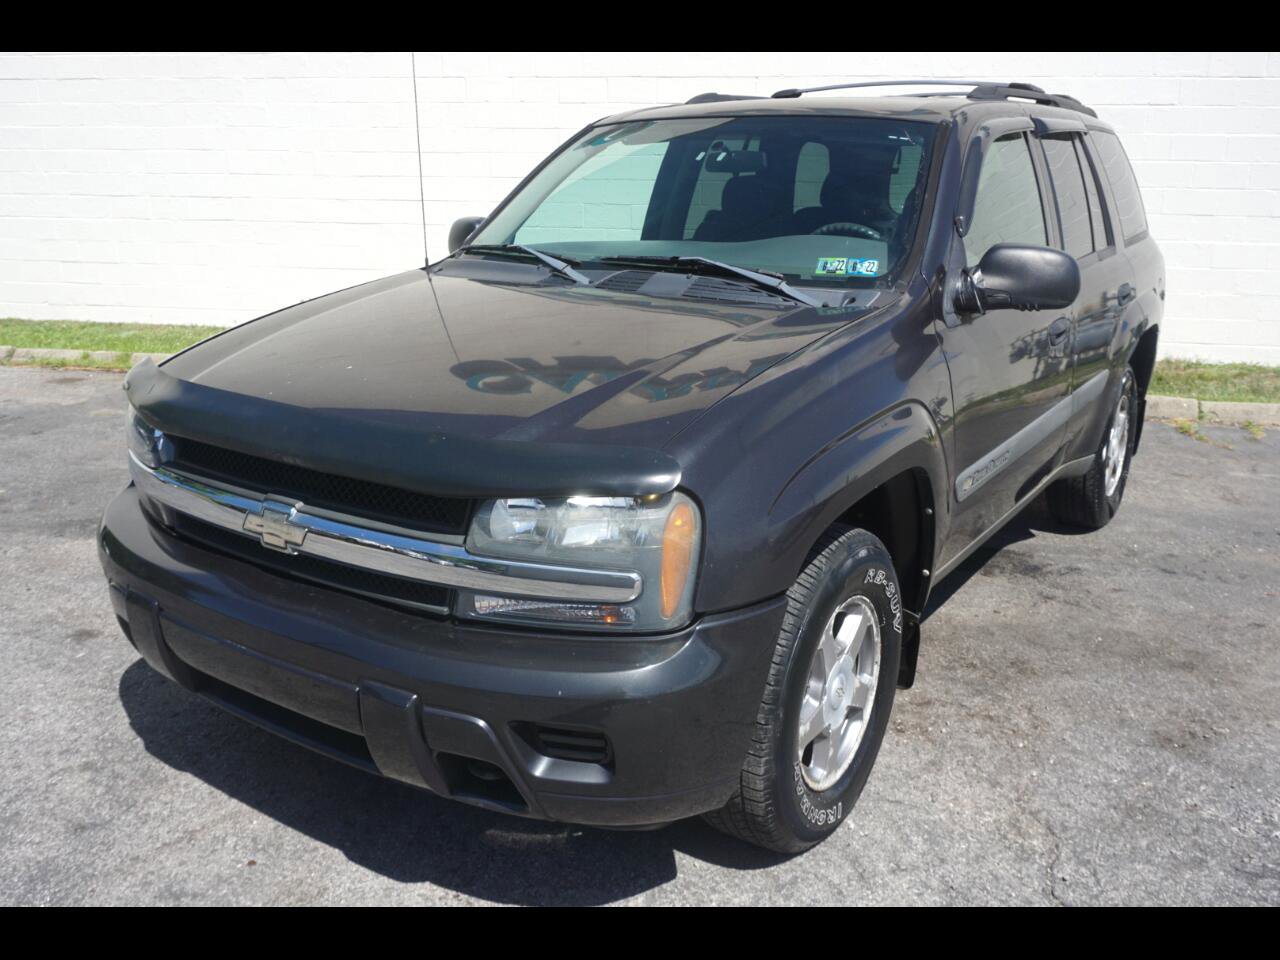 Used 2004 Chevrolet TrailBlazer for Sale Right Now - Autotrader